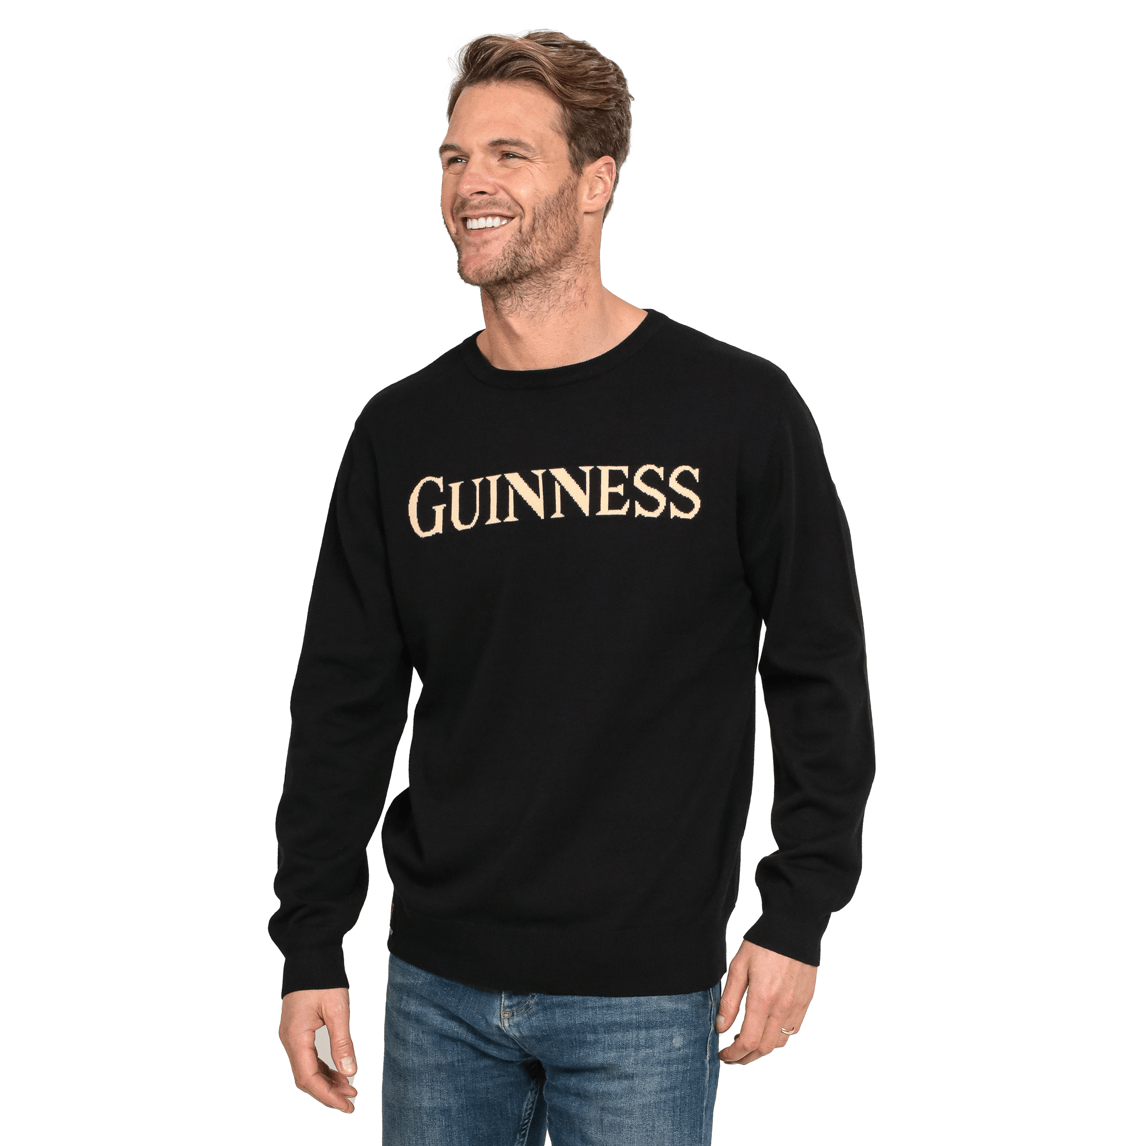 A man sporting a Guinness 100% Organic Cotton Jumper featuring the word Guinness.